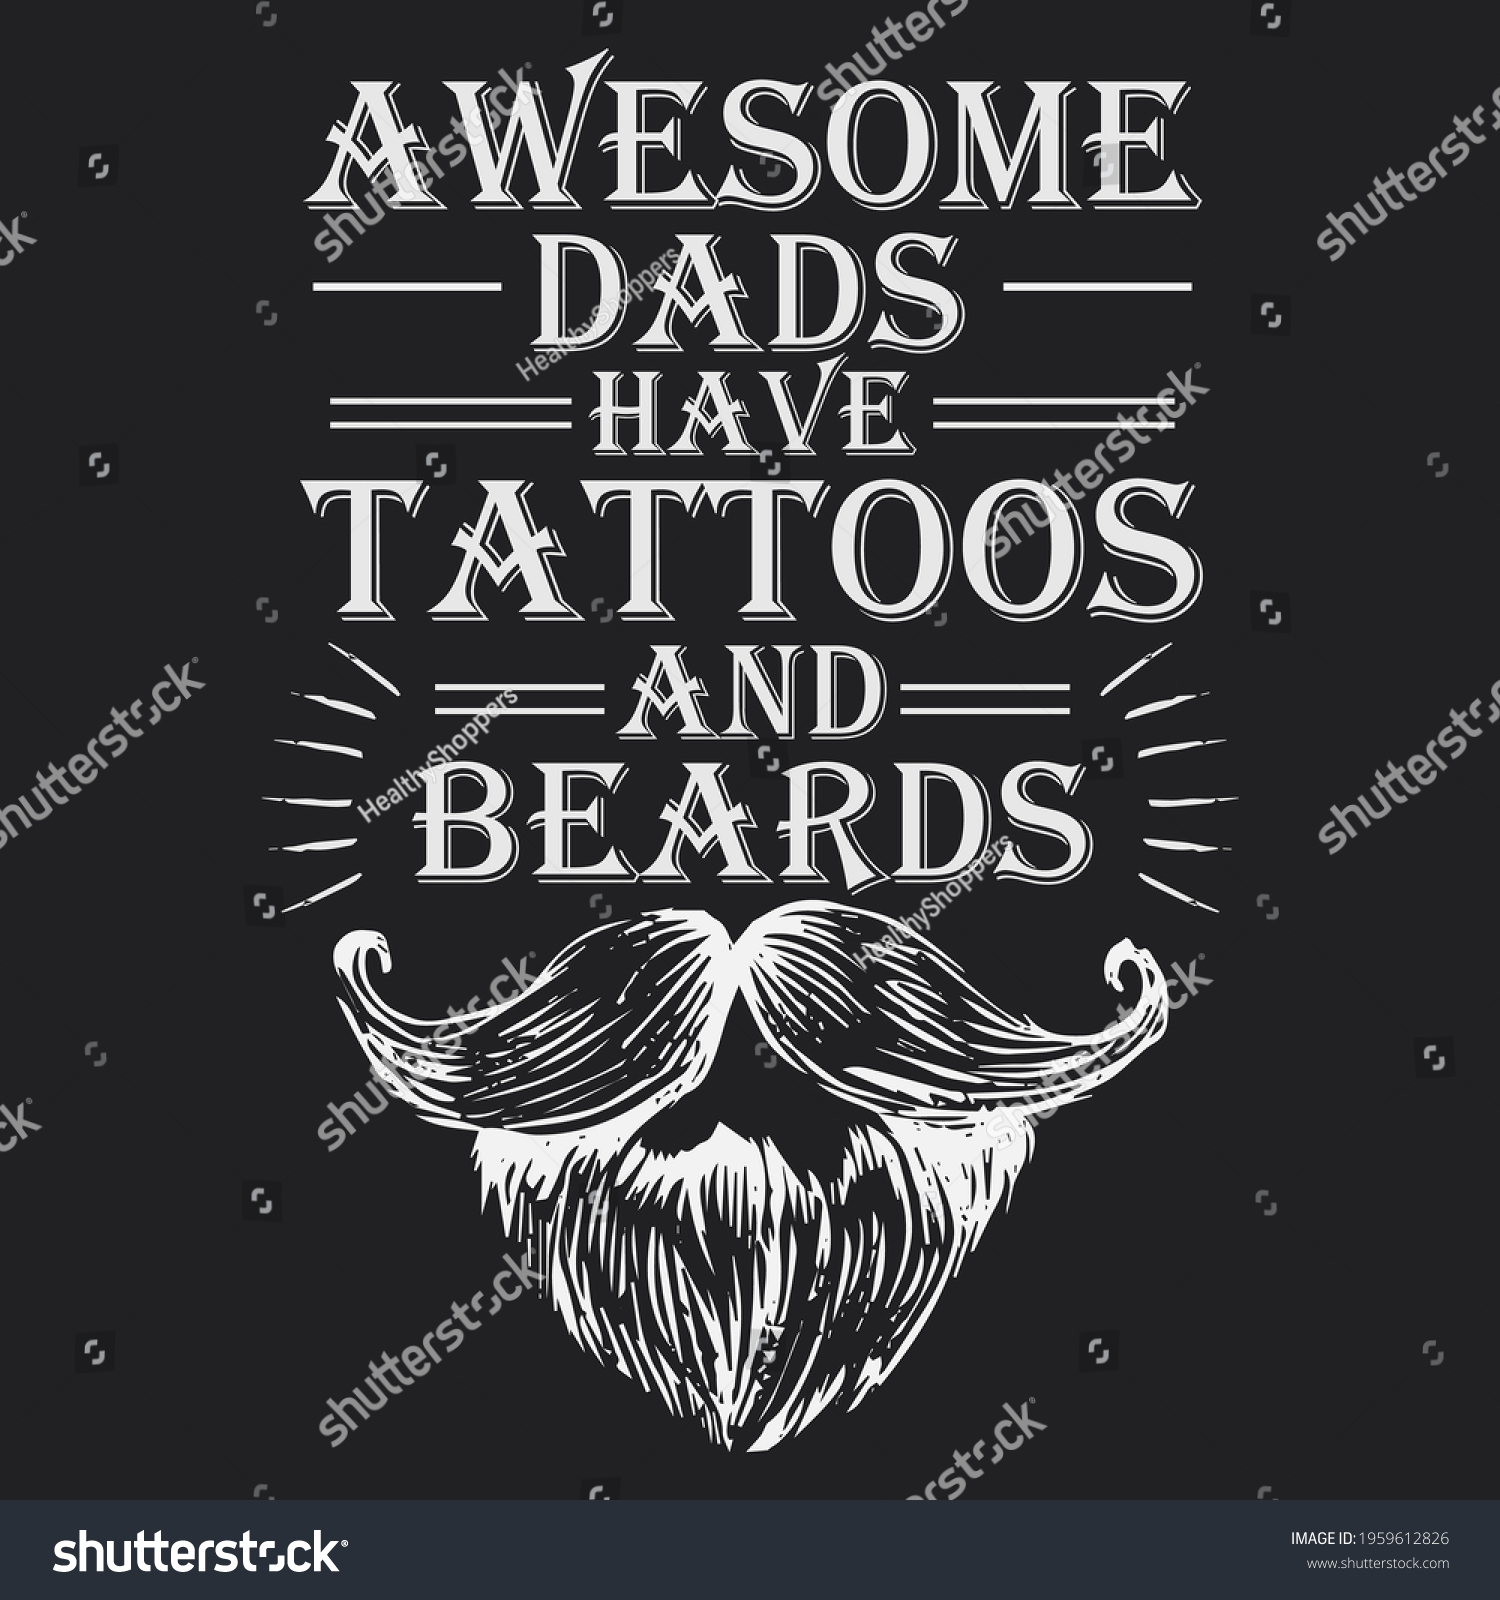 SVG of Father's day gift . awesome dad have tattoos and beards T-shirt Funny quotes. T-shirt Design template for Father's day. svg